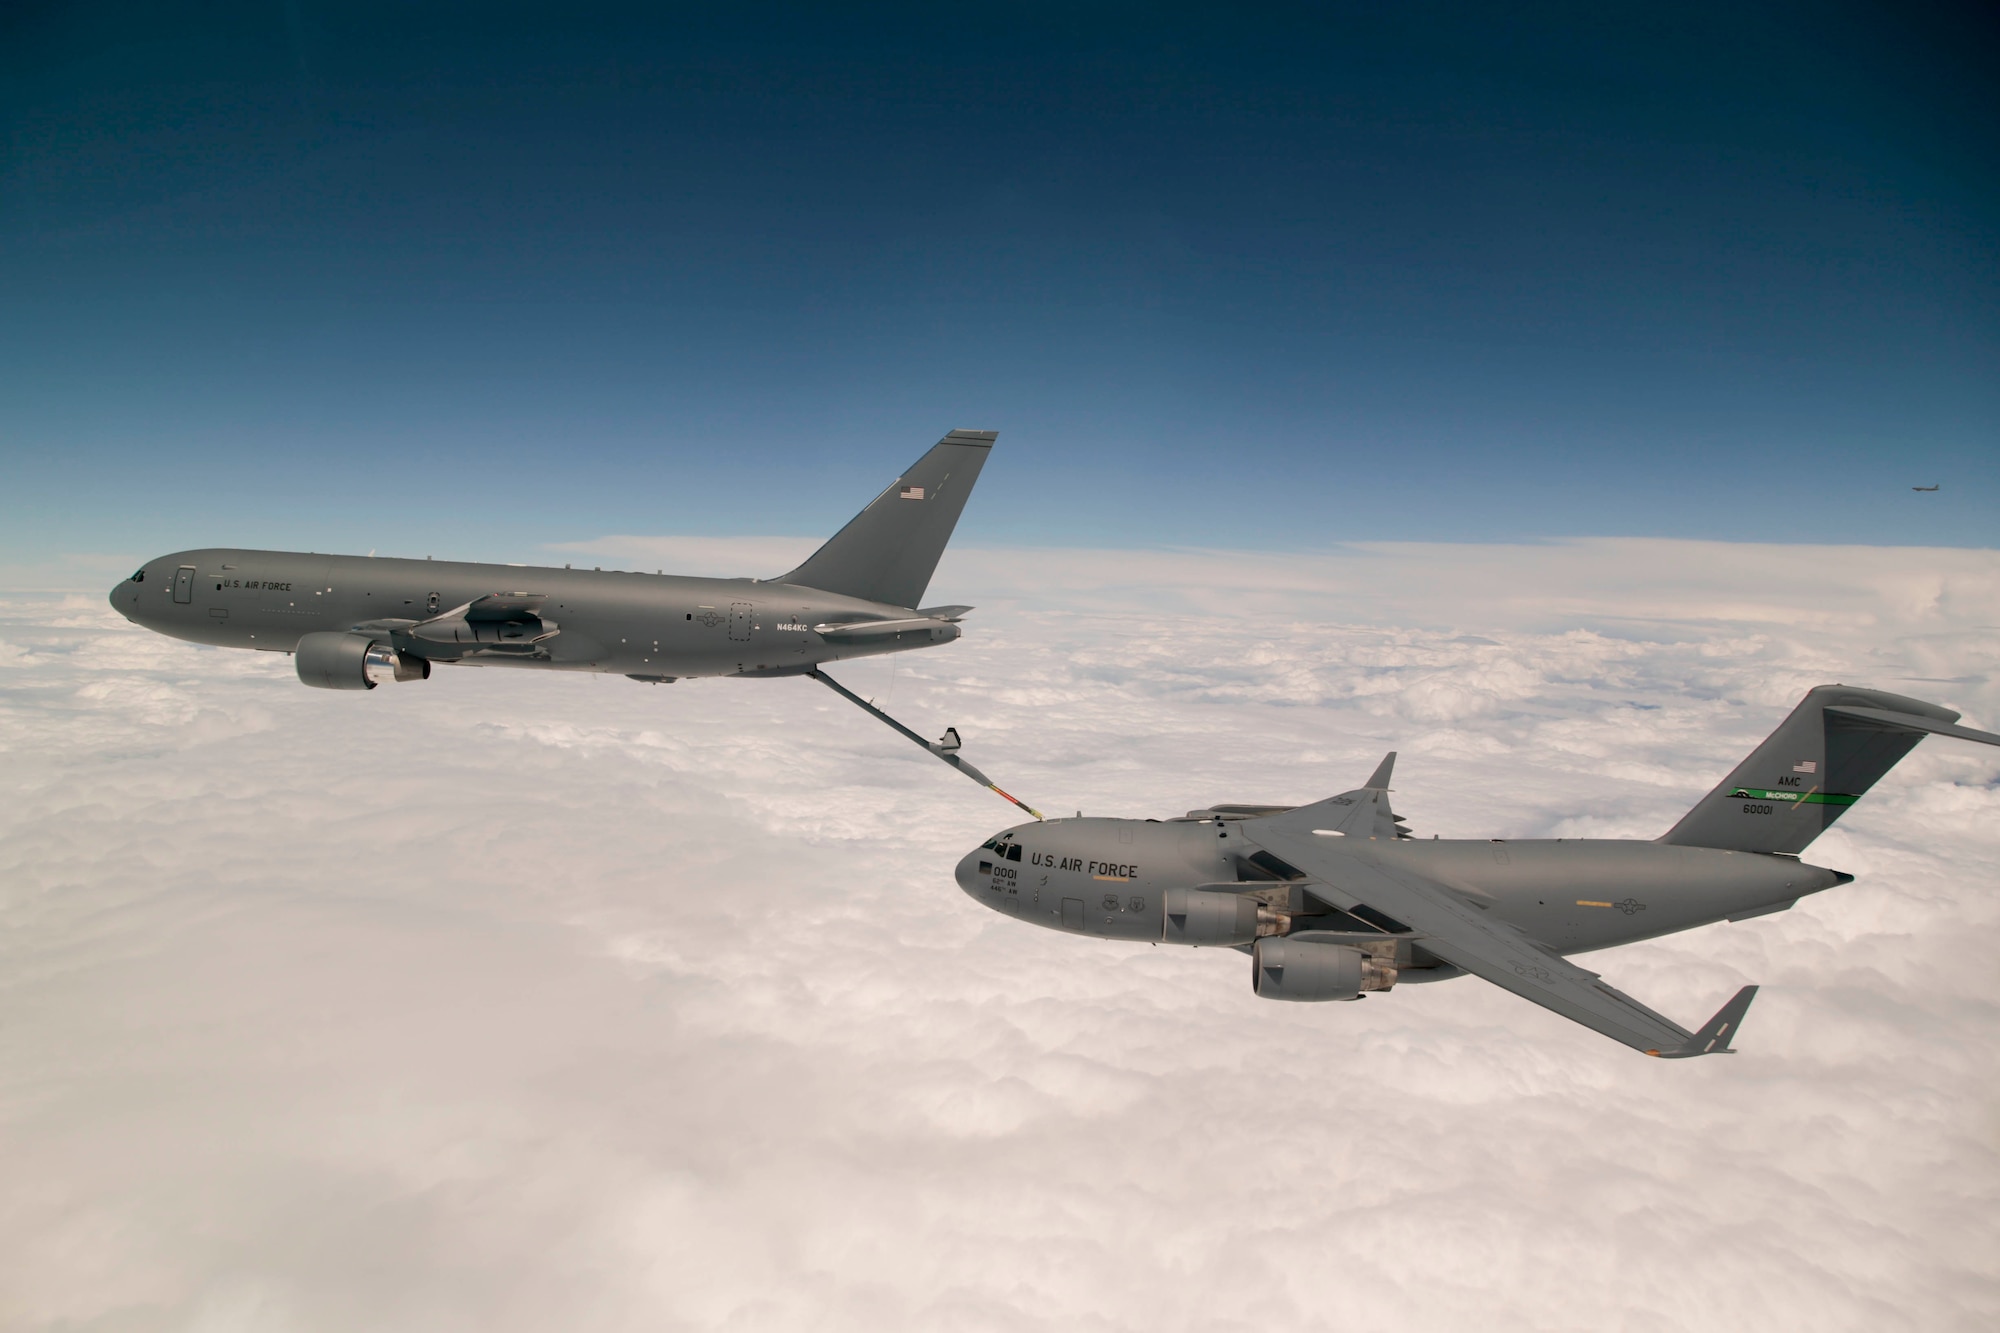 Boeing's KC-46 aerial refueling tanker conducts receiver compatibility tests with a U.S. Air Force C-17 Globemaster III from Joint Base Lewis-McChord as part of Test 003-06. The event marks the nearing completion of "Milestone C" in the new tanker's developmental testing stage. (U.S. Air Force photo by Christopher Okula)